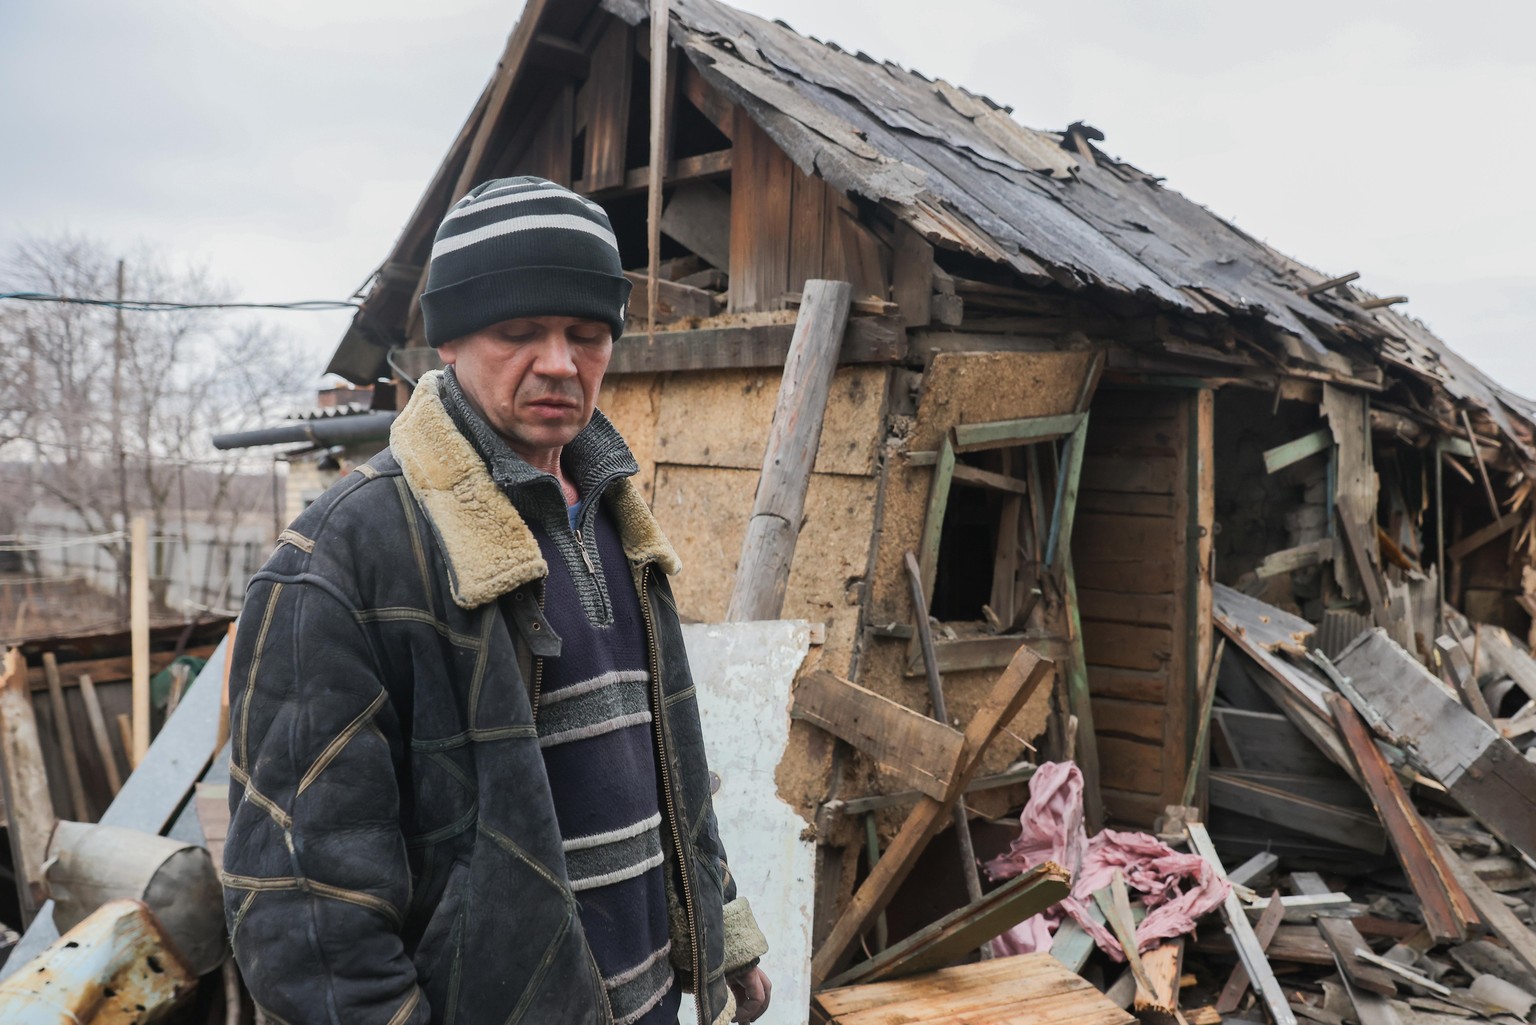 DONETSK PEOPLE'S REPUBLIC - FEBRUARY 24, 2022: A man is seen next to the ruins of a house destroyed by shellfire in Gorlovka. The People's Militia has reported one civilian dead and another five injur ...